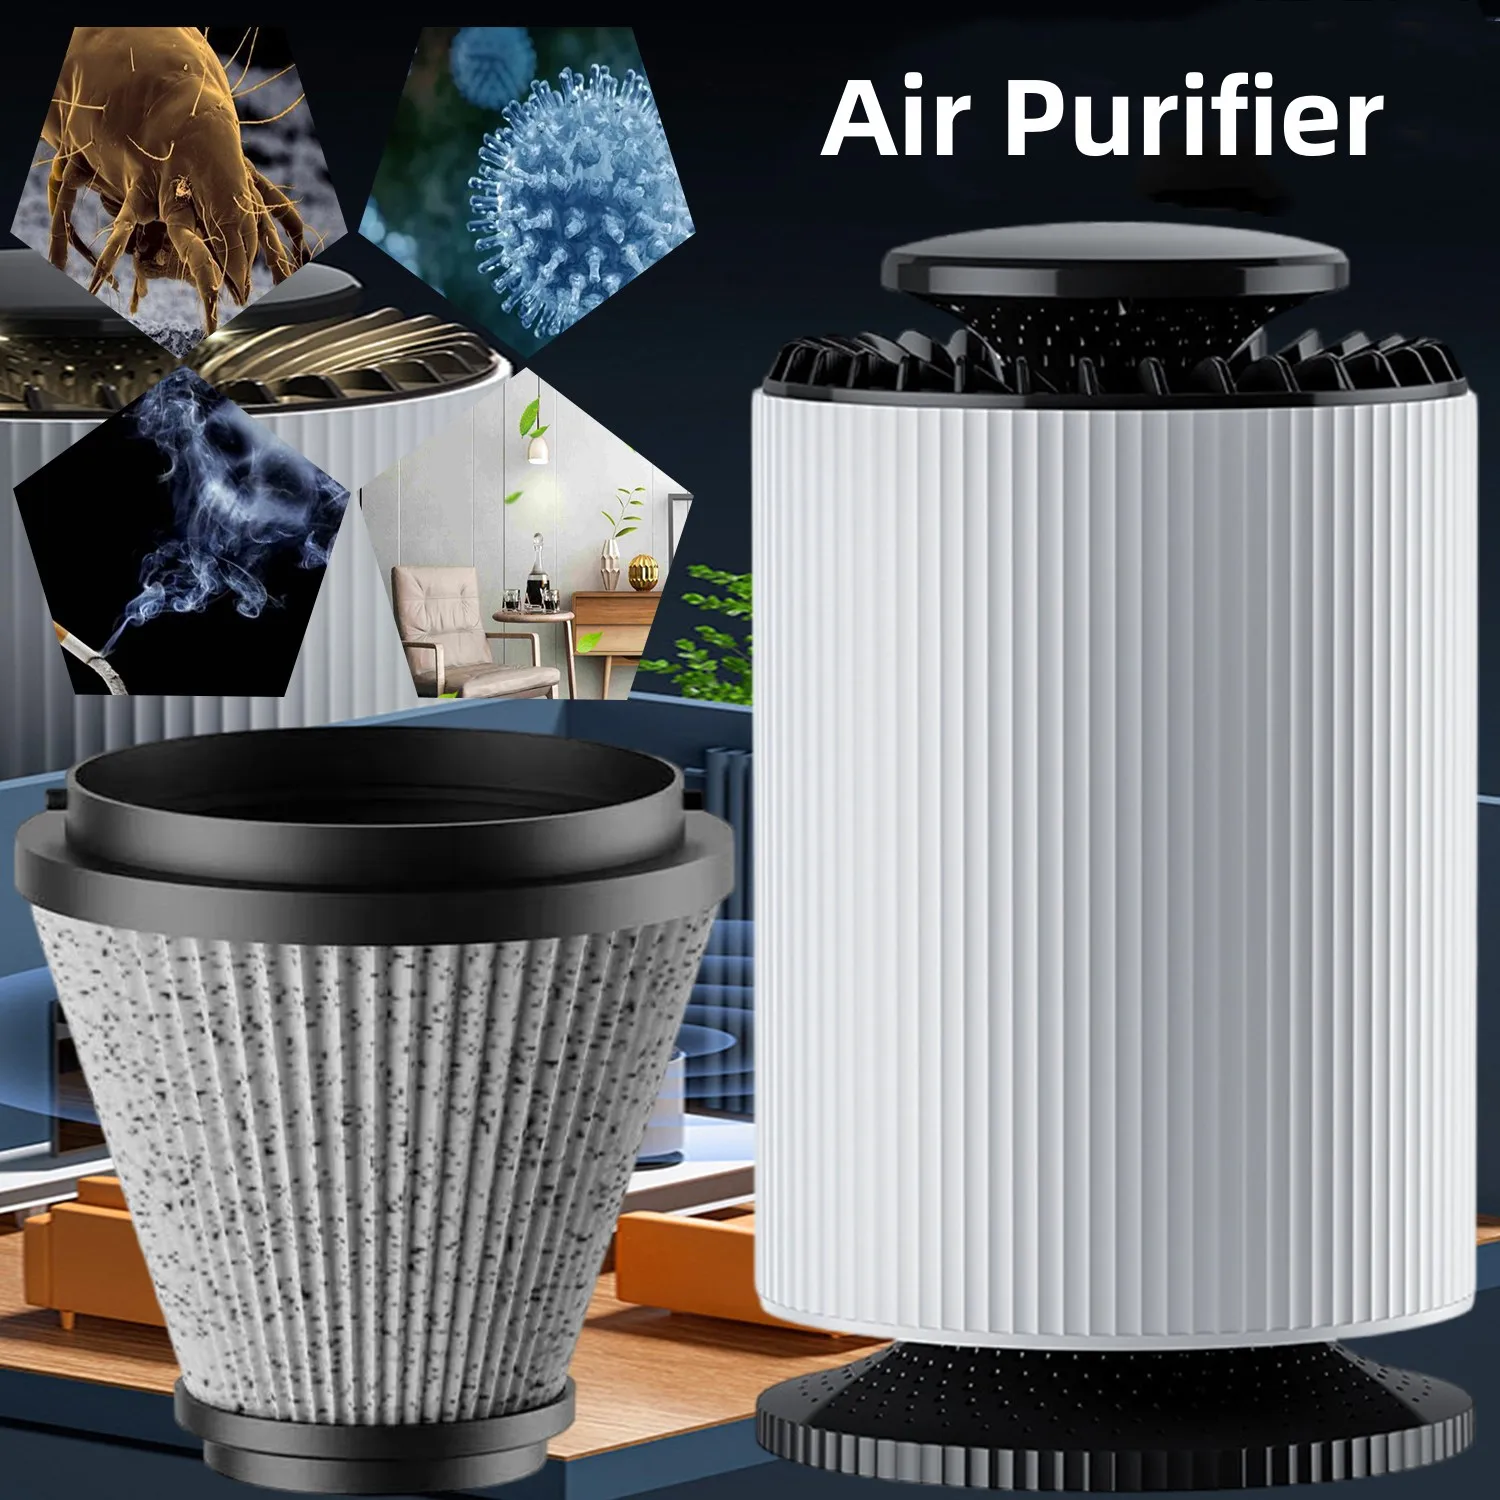 

Air Purifier Electric UV Generator Odor Eliminator Harmful Smoke Gas Formaldehyde Remover For Home Car With Replaceable Filter